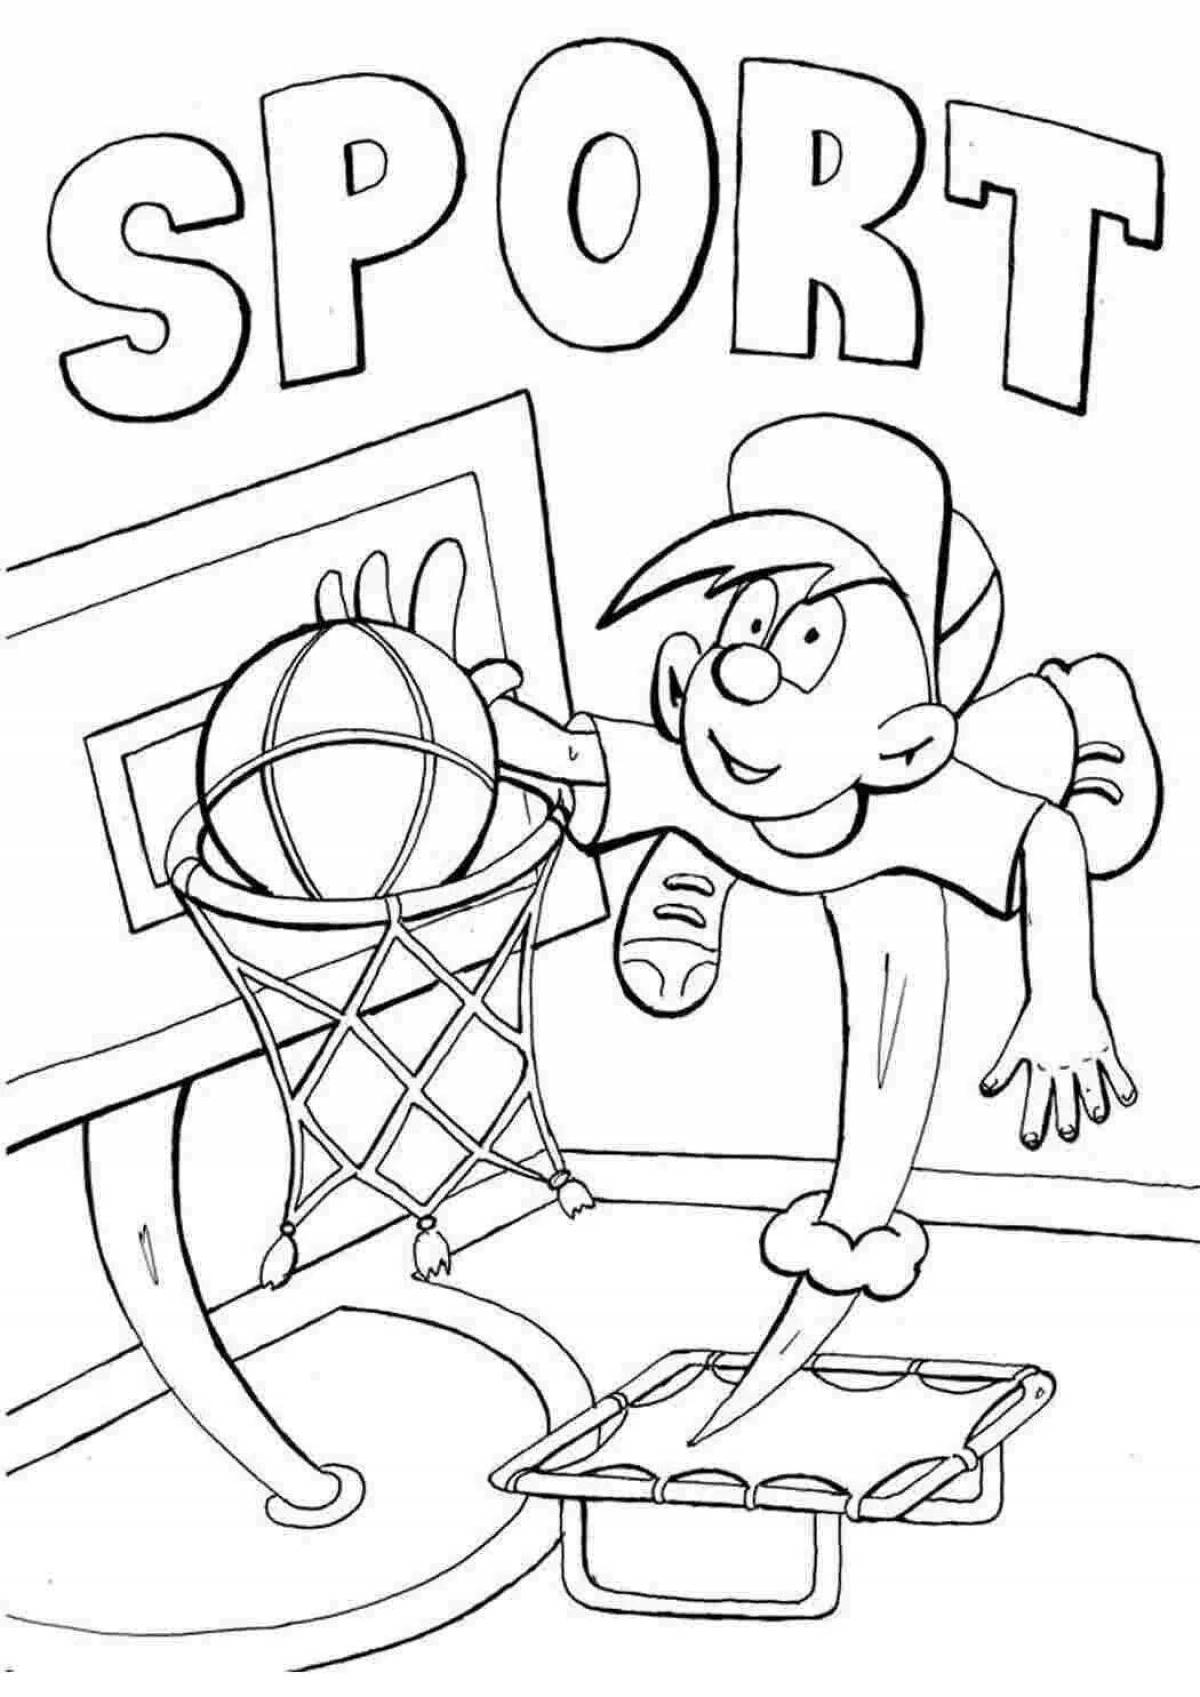 About sports and a healthy lifestyle for children #7